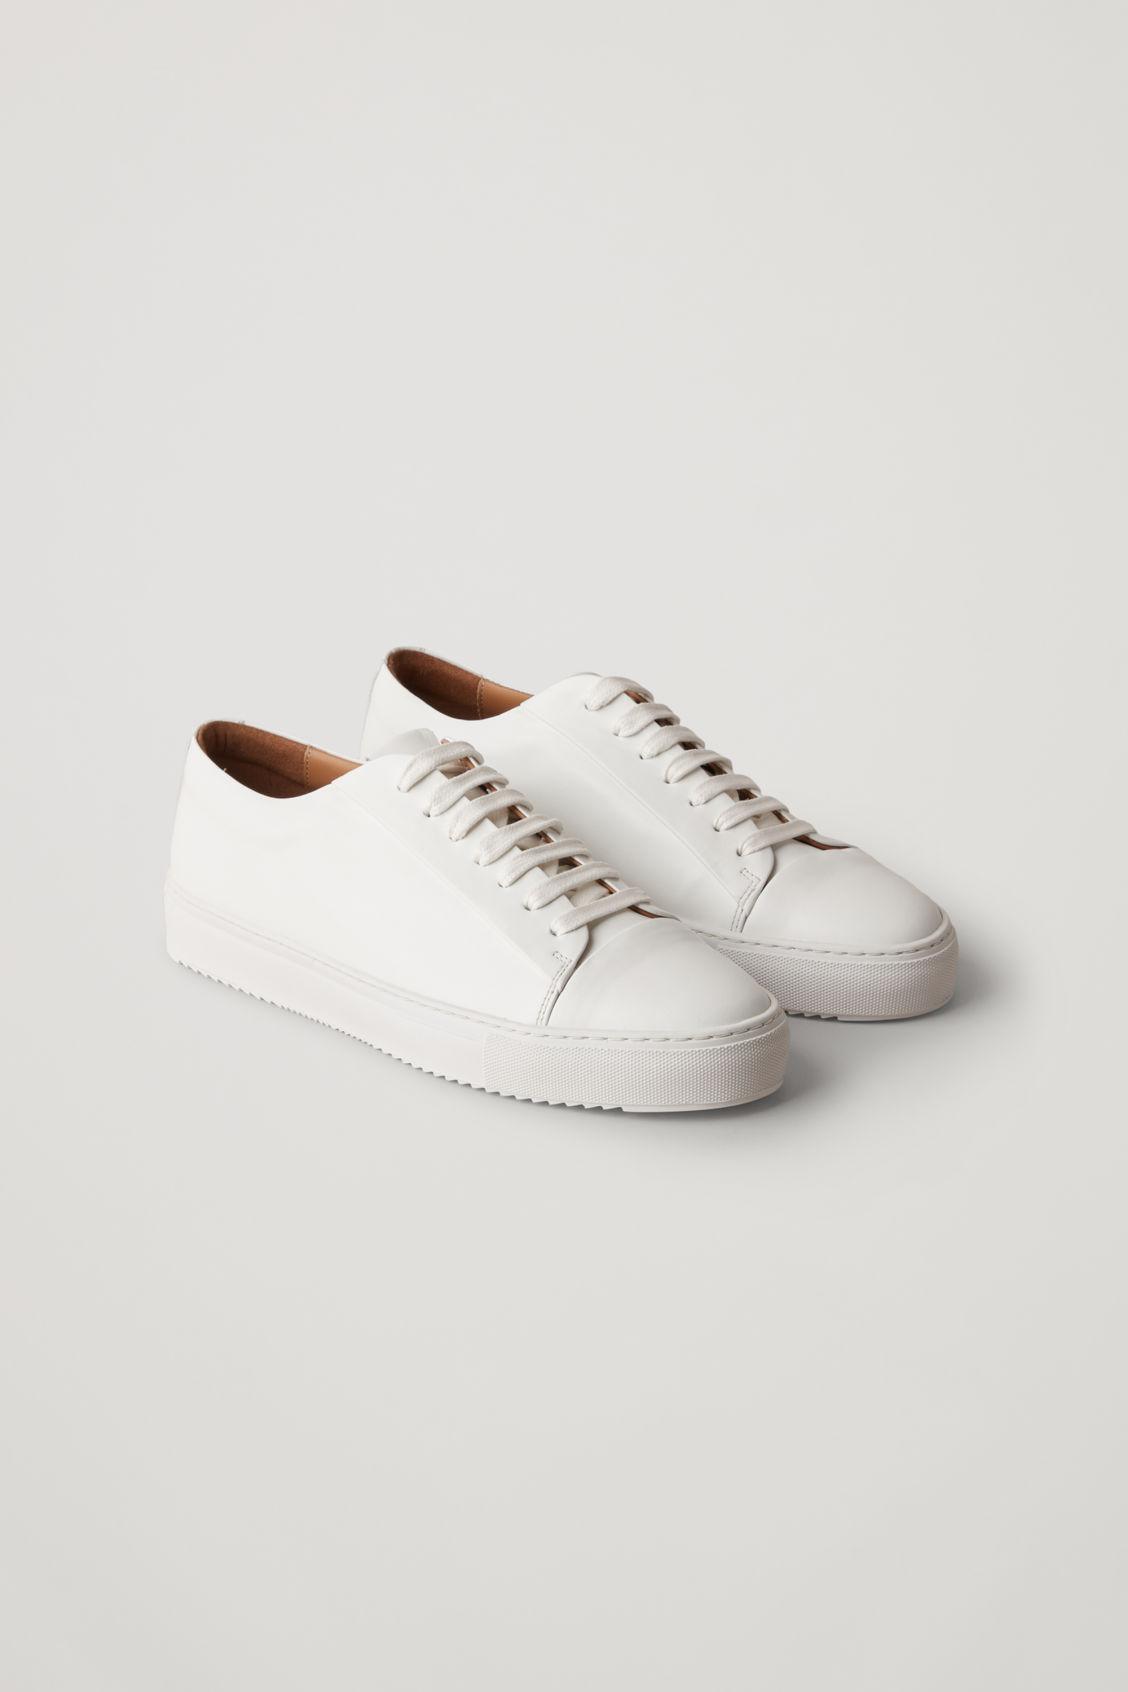 COS Thick-soled Leather Sneakers in White for Men Lyst